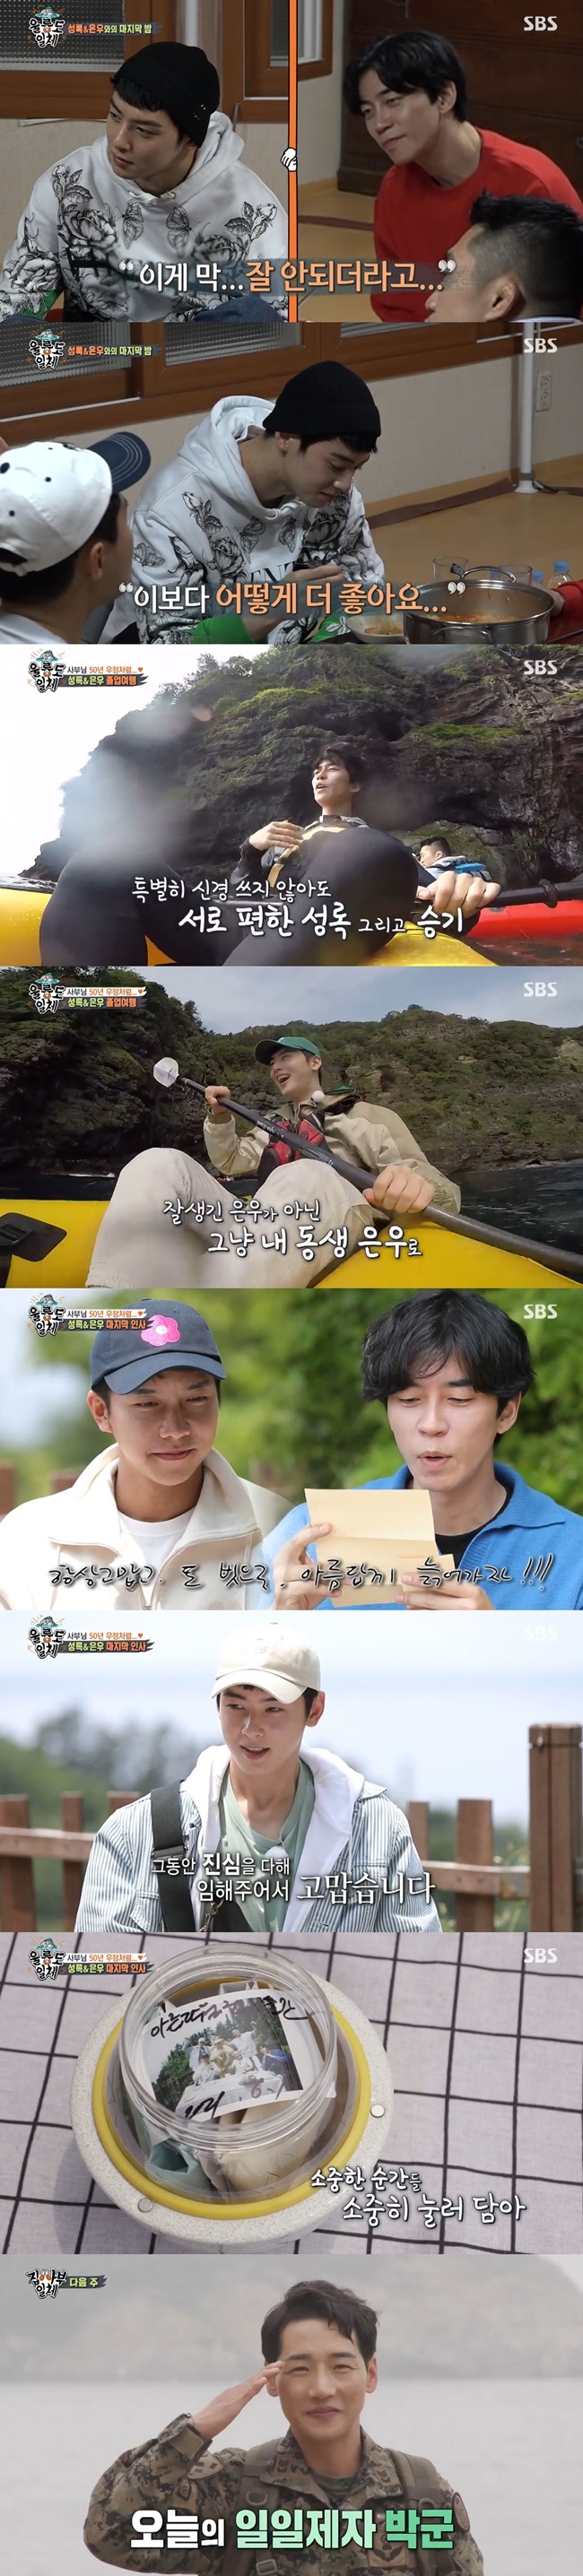 Park Gun predicted a days march as a student, with Shin Sung-rok and Cha Eun-woos last greetings drawn.On SBS All The Butlers broadcast on June 20, Master Yi Jang-hui and Ulleungdo story 2 and the last trip to Shin Sung-rok - Cha Eun-woo were drawn.Yang Se-hyeong said, Today, I ate the wrong nausea medicine and I was in a condition, but I kept worrying that the two were the last, so I did not get up (UP).It was a hard day, he said.Shin Sung-rok said, It was good to meet many masters, but it was good to contact us when we worked together and when we did not work.Cha Eun-woo also said, I was broadcasting with my brothers around, so I smelled my brothers. I thought I was going to see my brothers every time rather than going to shoot.Lee Seung-gi said, We should have been a better brother to Jung Eun-woo.But Cha Eun-woo smiled, How better is it?The next day, the disciples went on a KAYAK tour to build memories with Shin Sung-rok - Cha Eun-woo. Lee Seung-gi said, If you choose the best brother, it is a deformed type.Its easy to be with your brother, Shin Sung-rok said. I didnt try to force anything for our relationship, it was just comfortable.I personally gave a lot of will to you as my brother. Cha Eun-woo is worried about What is Happiness these days ahead of getting off.I dont think there is a mobile person (real name), said Cha Eun-woo. It was fun to come to see my brothers, not to say it was a mouthful. It was exciting and fun, not working.Yang Se-hyeong said, If you say Cha Eun-woo to the public, you think only about handsome and visual good.If you want to drink anytime, please contact me. If you contact me, I should go.After the KAYAK tour, the disciples enjoyed breakfast with their own bread made by Master Yi Jang-hui; the disciples filled the memories with time capsules prepared by Cha Eun-woo.He also read a handwritten letter written by Shin Sung-rok and Cha Eun-woo.Shin Sung-rok cheered on himself, as well as one member.Cha Eun-woo said, I have learned a lot from my sisters, but I have learned a lot from my brothers. He promised his brothers that he would devote himself to becoming a younger brother who others can not.Along with this, the disciples took a commemorative photo with Master Yi Jang-hui and buried the time capsule.